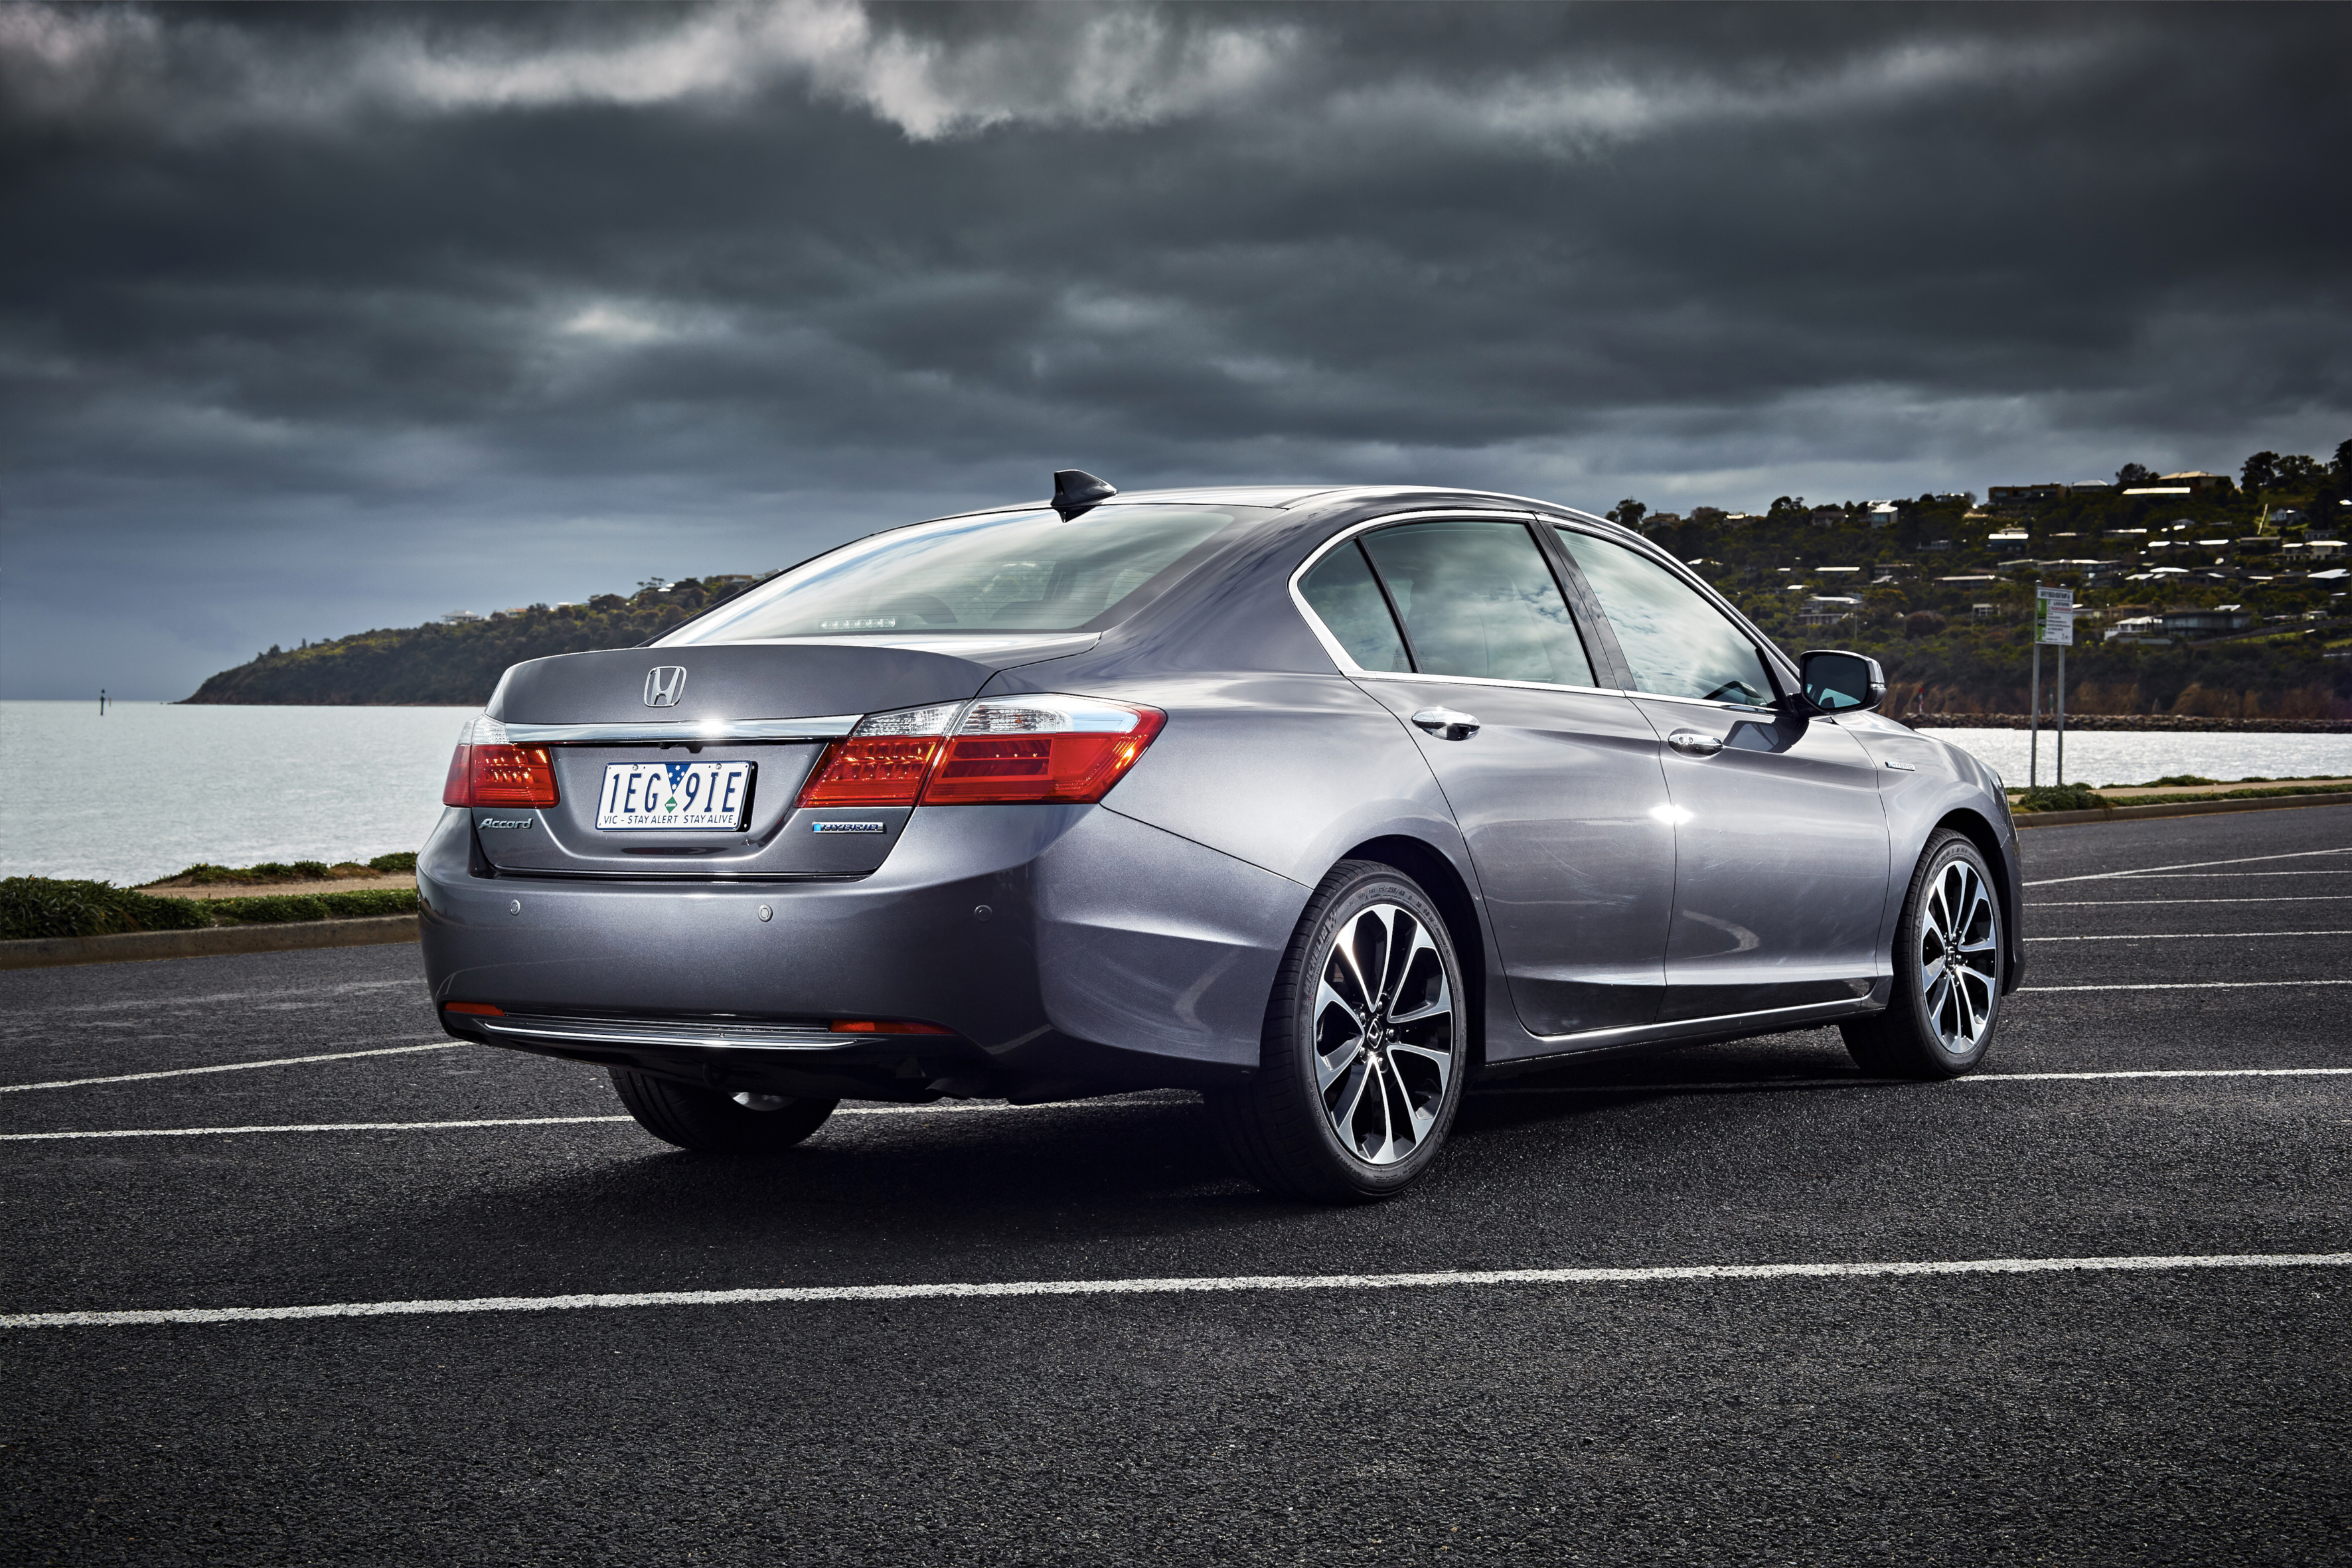 Honda Accord Coupe accessories specifications